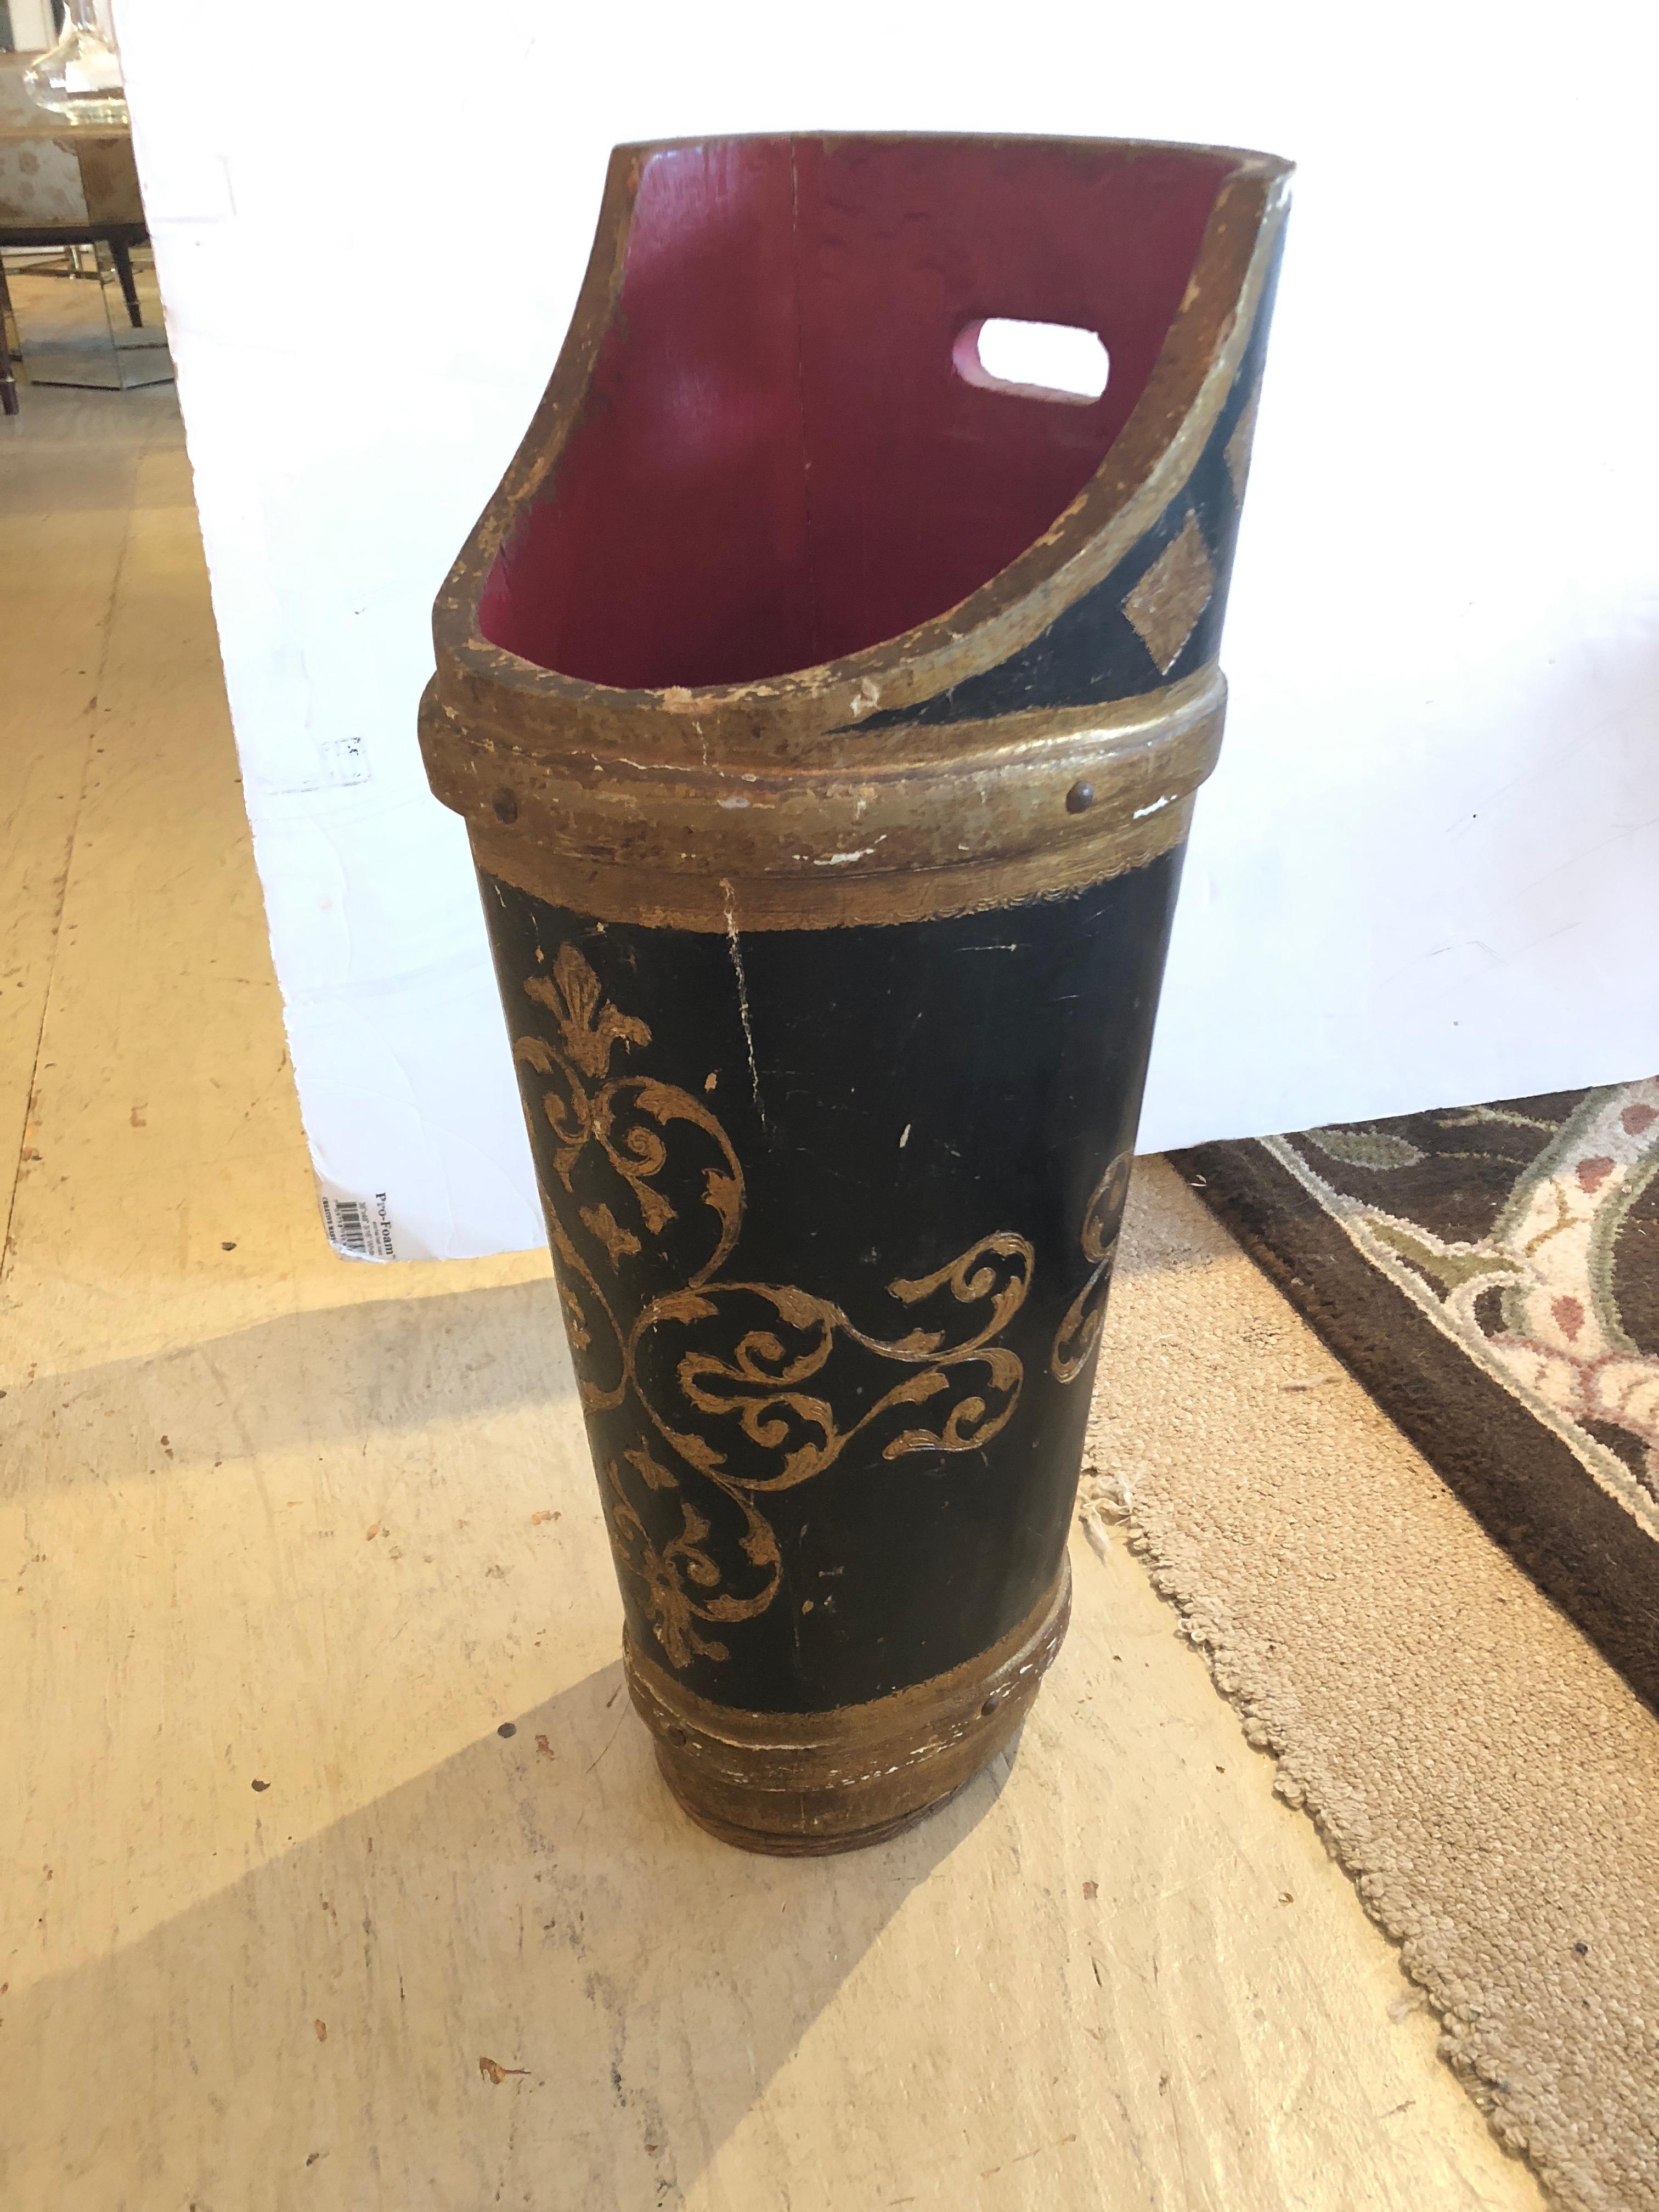 Vintage Italian Florentine umbrella stand in rich gilded gold, black and bright red interior. It is thick wood, weighted and heavy in order to hold umbrellas or place as a decorative accessory.